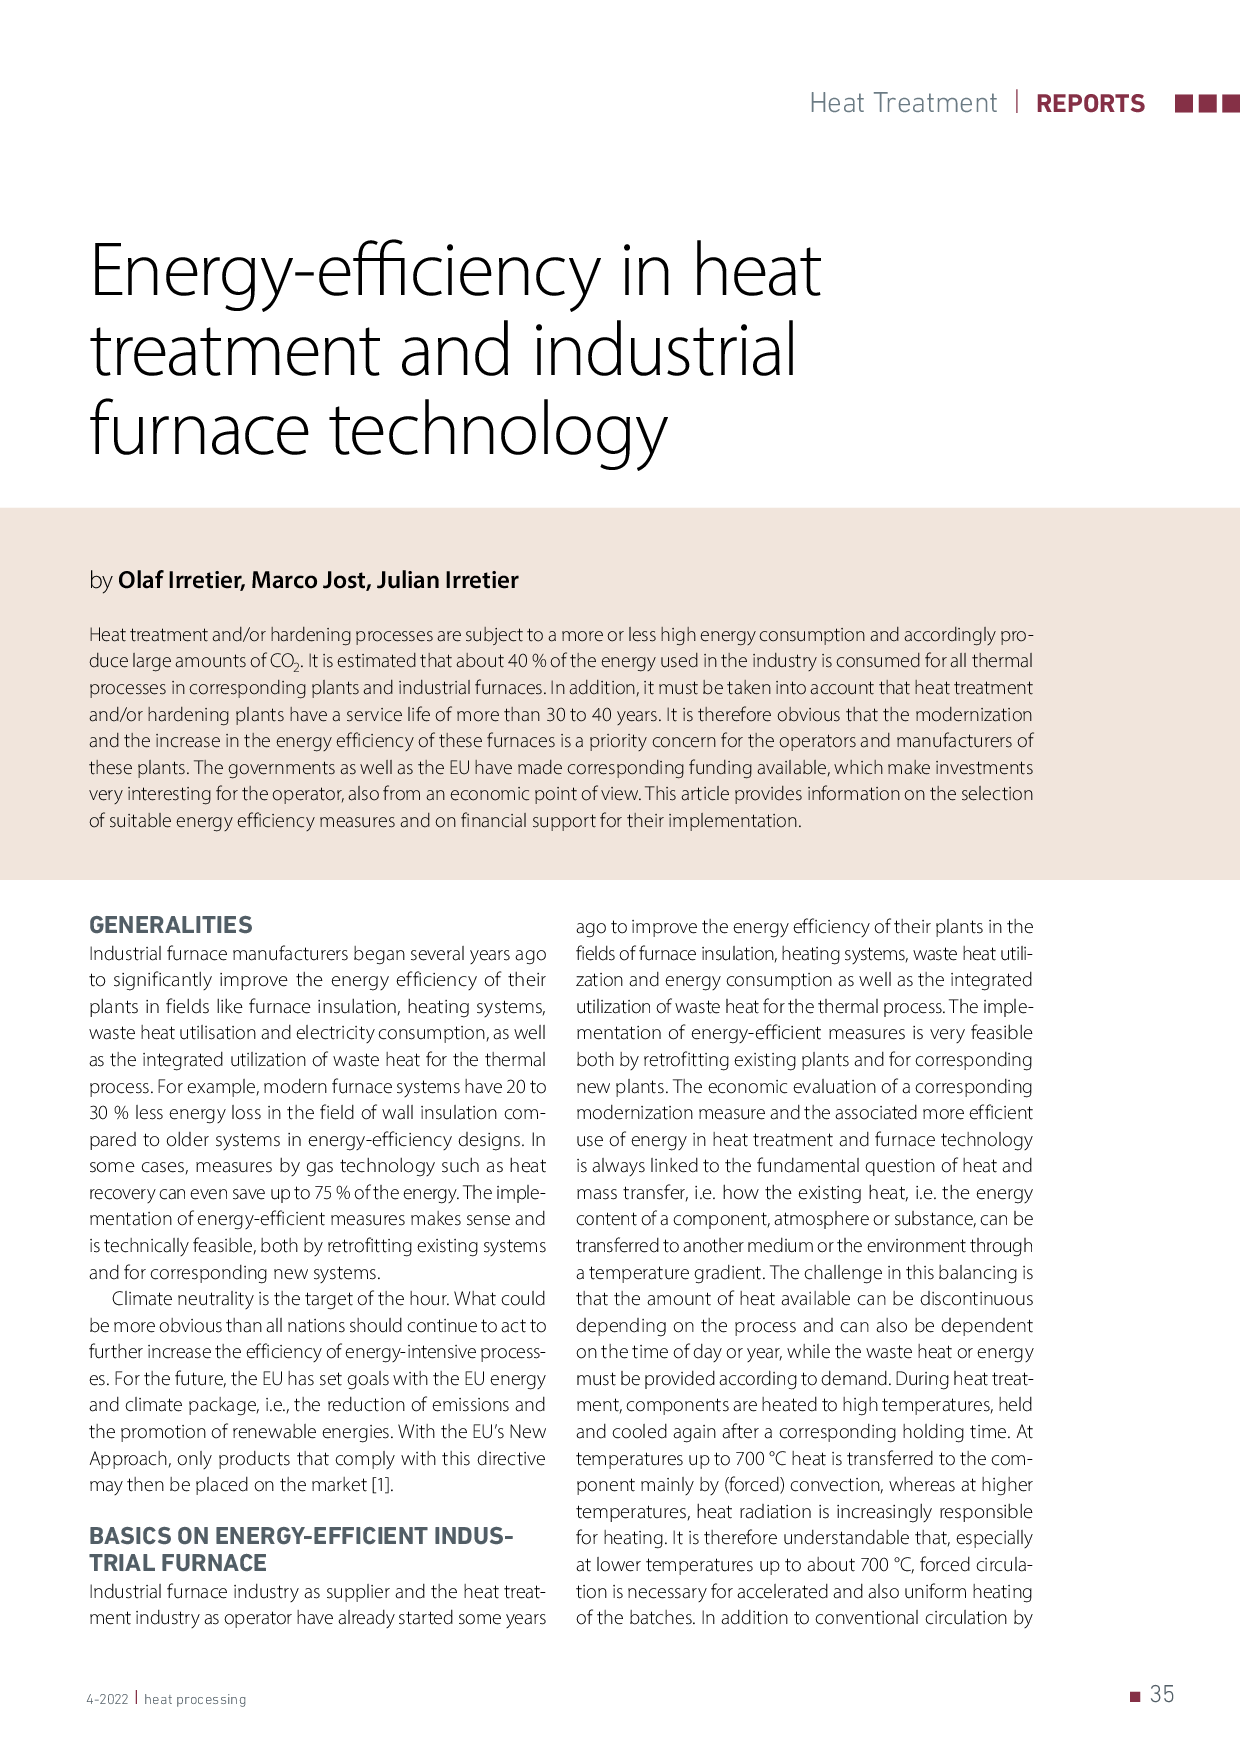 Energy-efficiency in heat treatment and industrial furnace technology